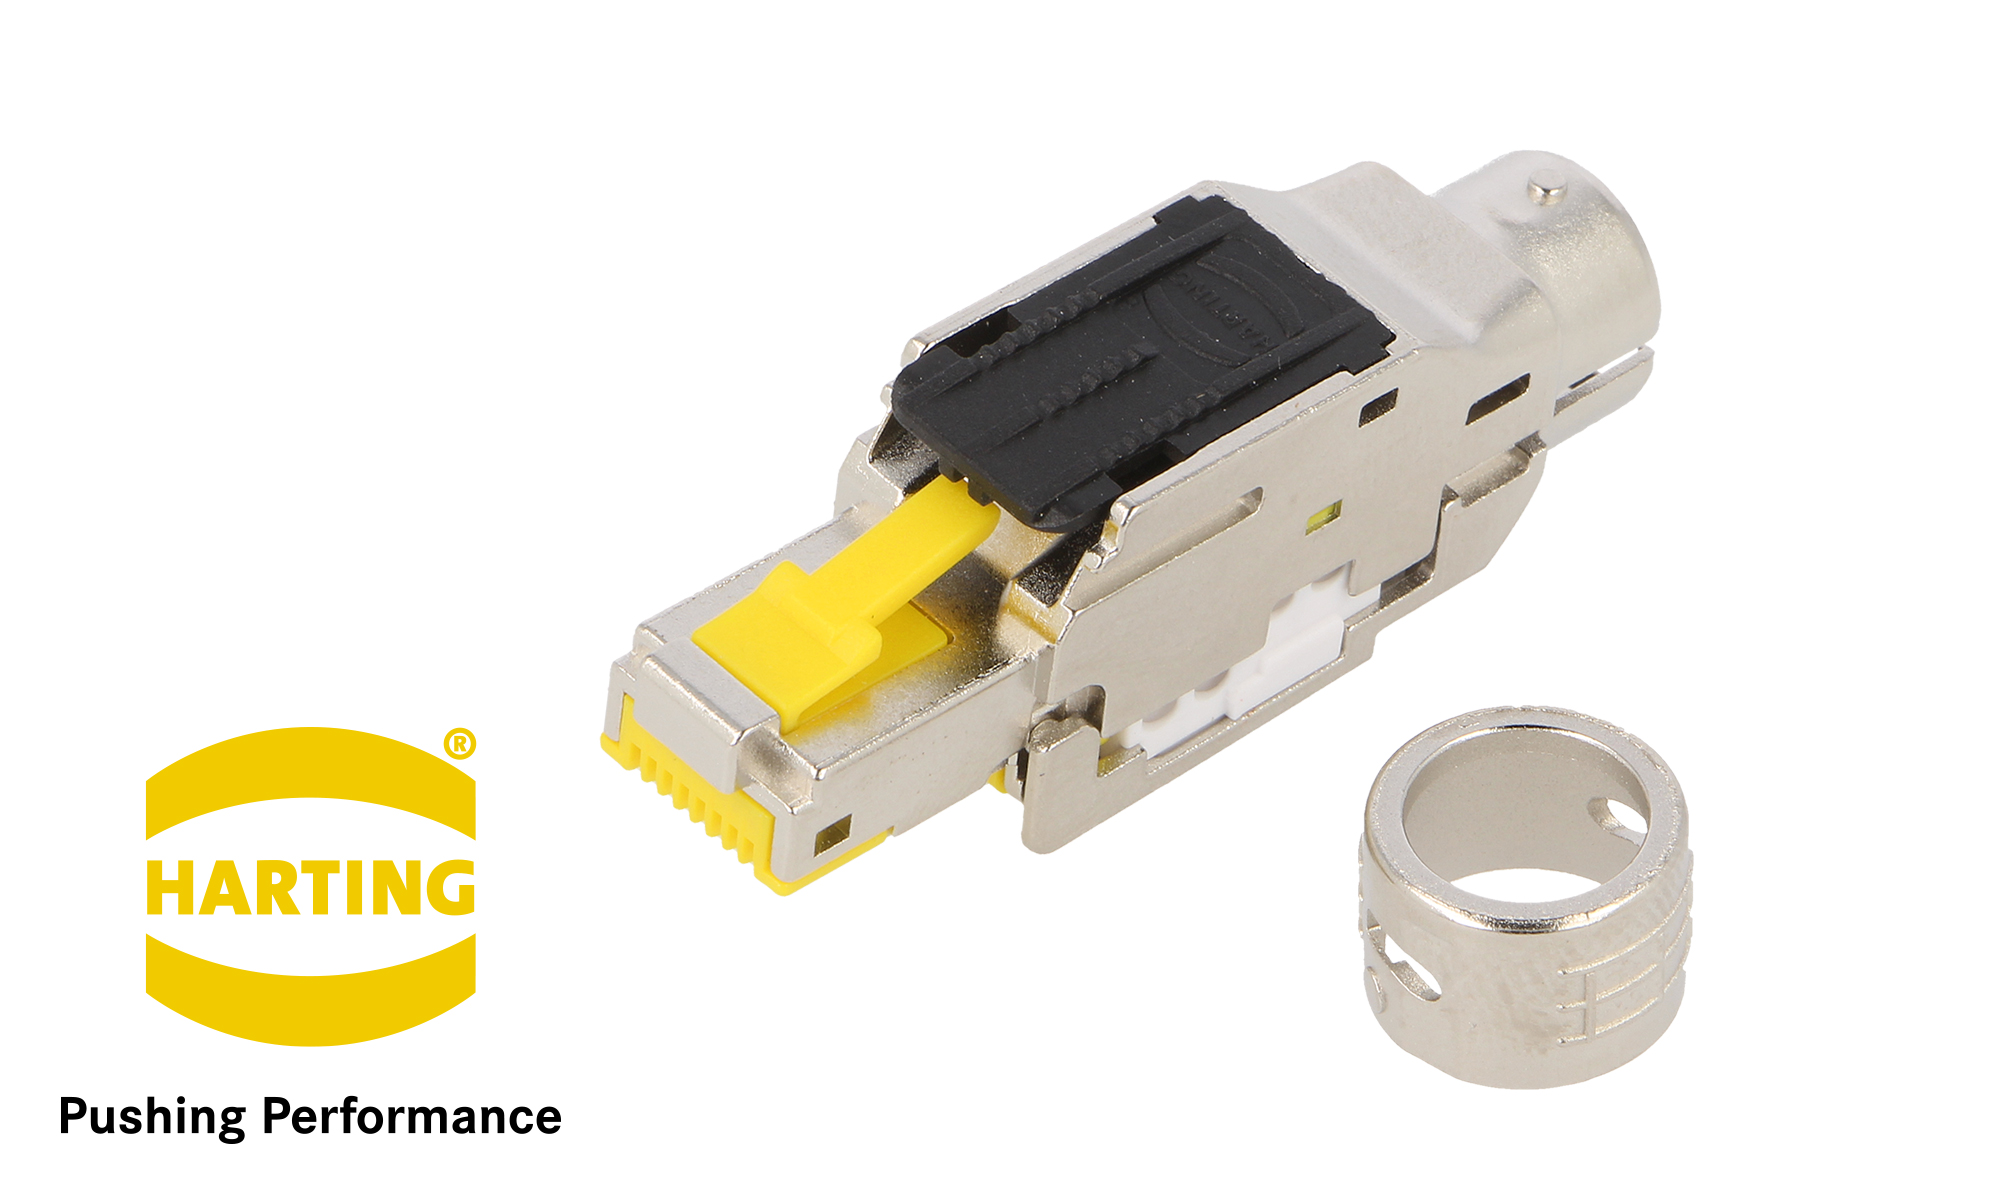 Toolless RJ45 connectors by Harting